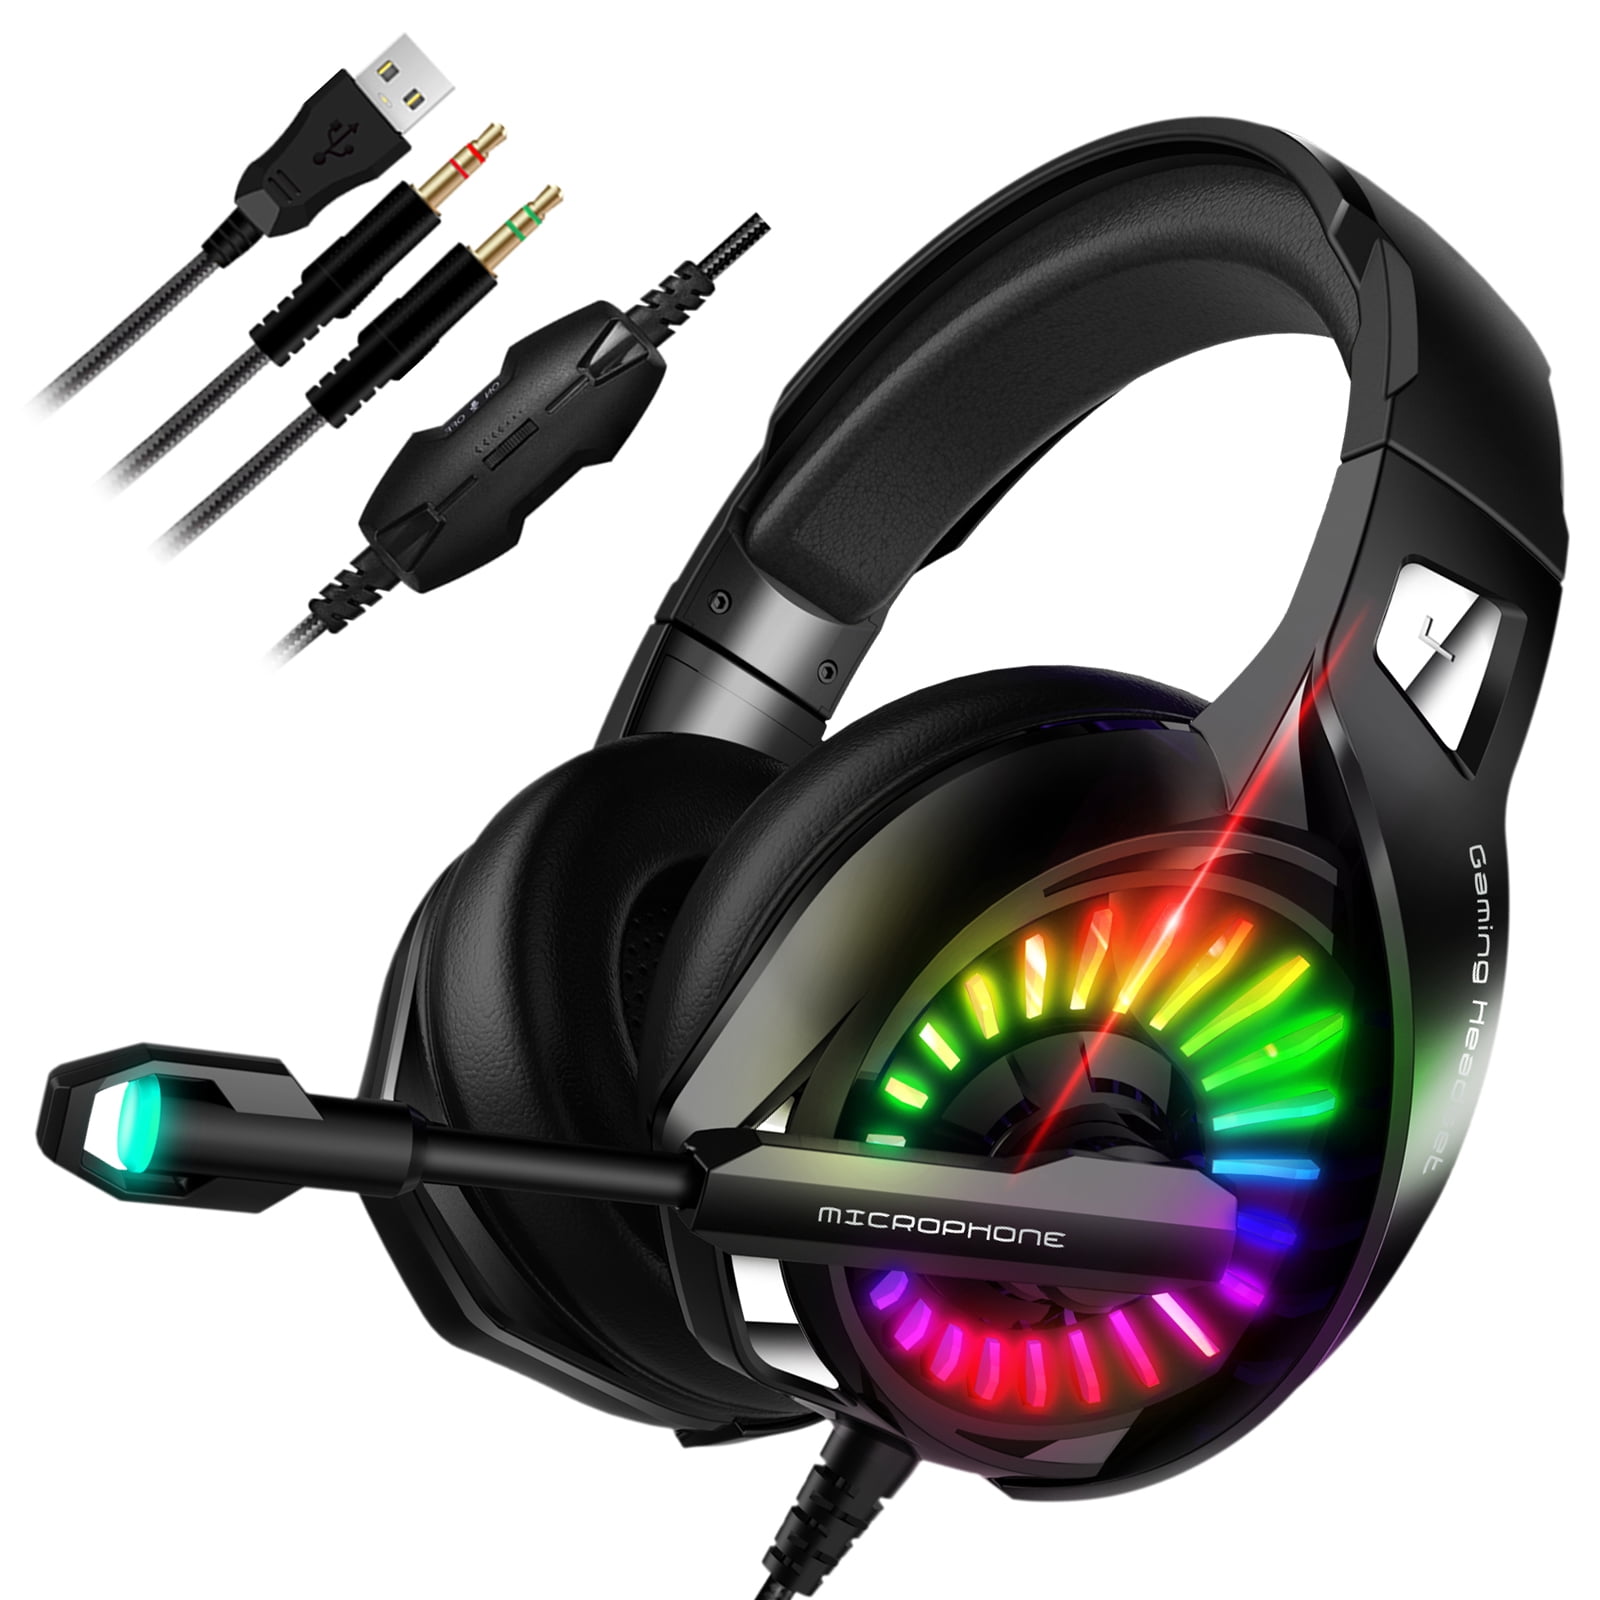 Merchandiser Dictatuur Isoleren TSV Gaming Headset for PC, PS4, Xbox One - 7.1 Surround Sound Headphones  Over-Ear with Noise Canceling Microphone, RGB Backlit Lights, Memory  Earmuffs, 3.5mm Wired Headset for PC, Laptop, Mobile, Mac -